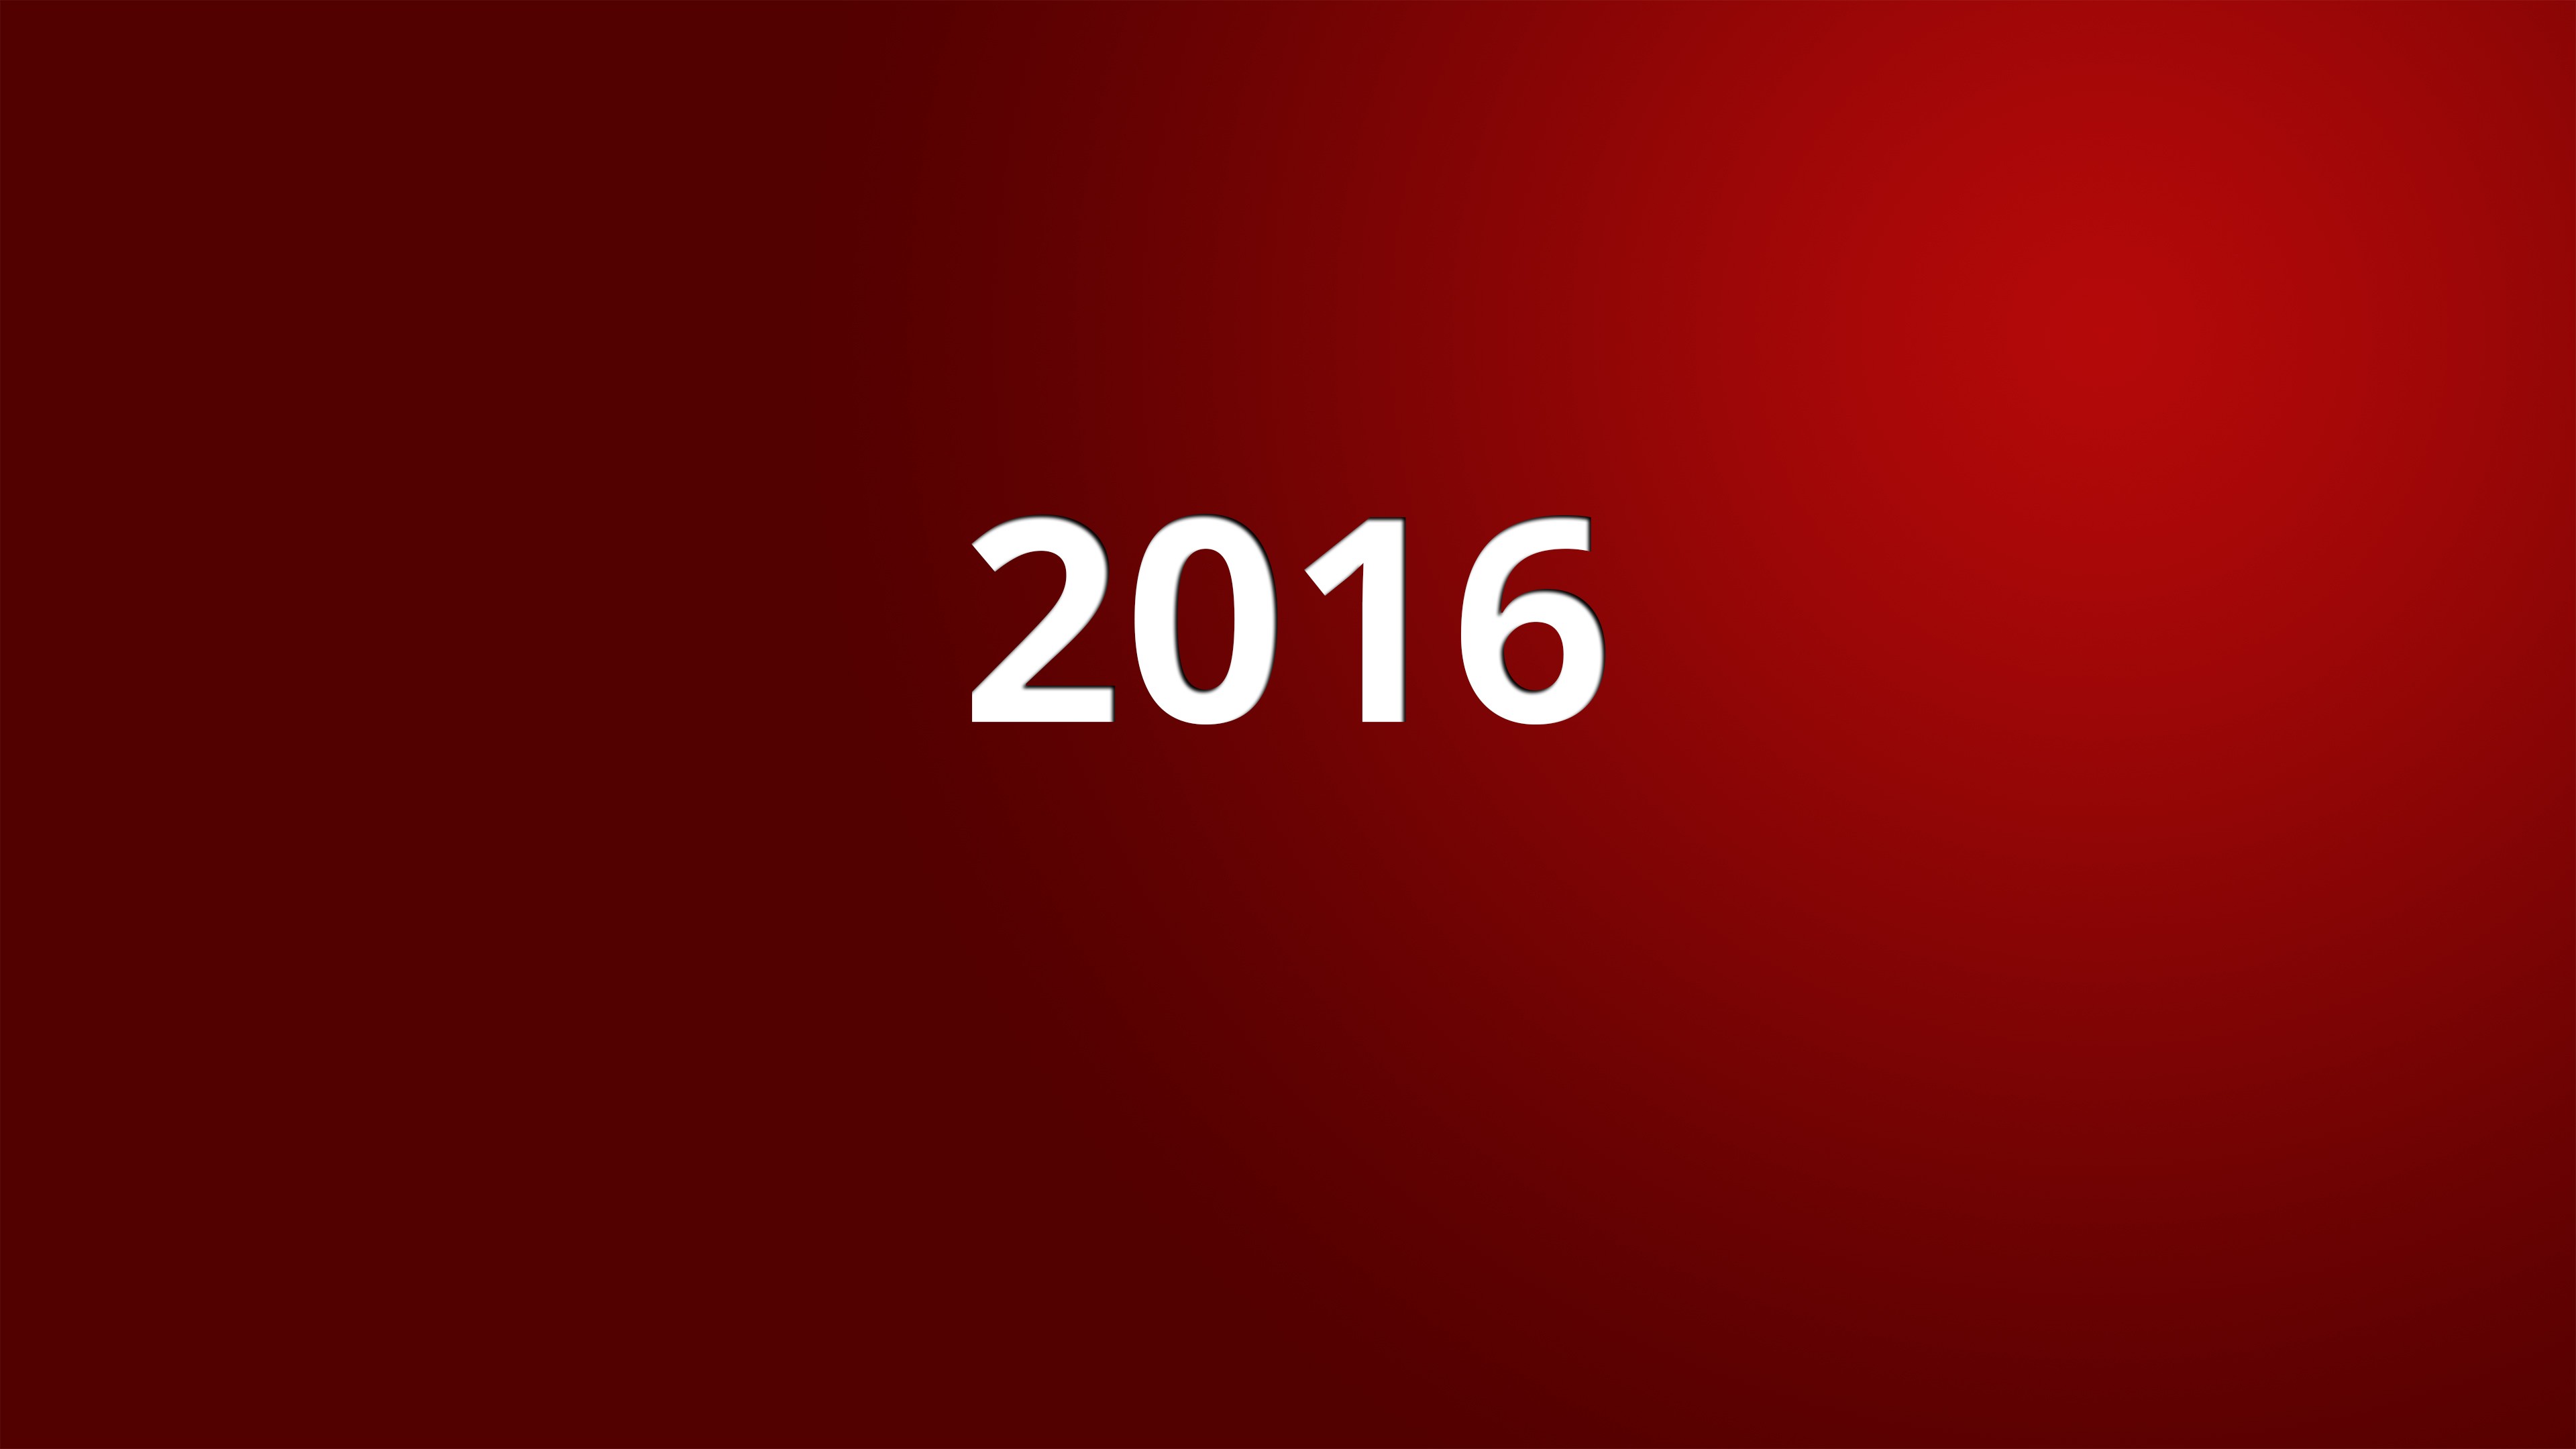 General 3840x2160 New Year minimalism 2016 (year) red background simple background numbers